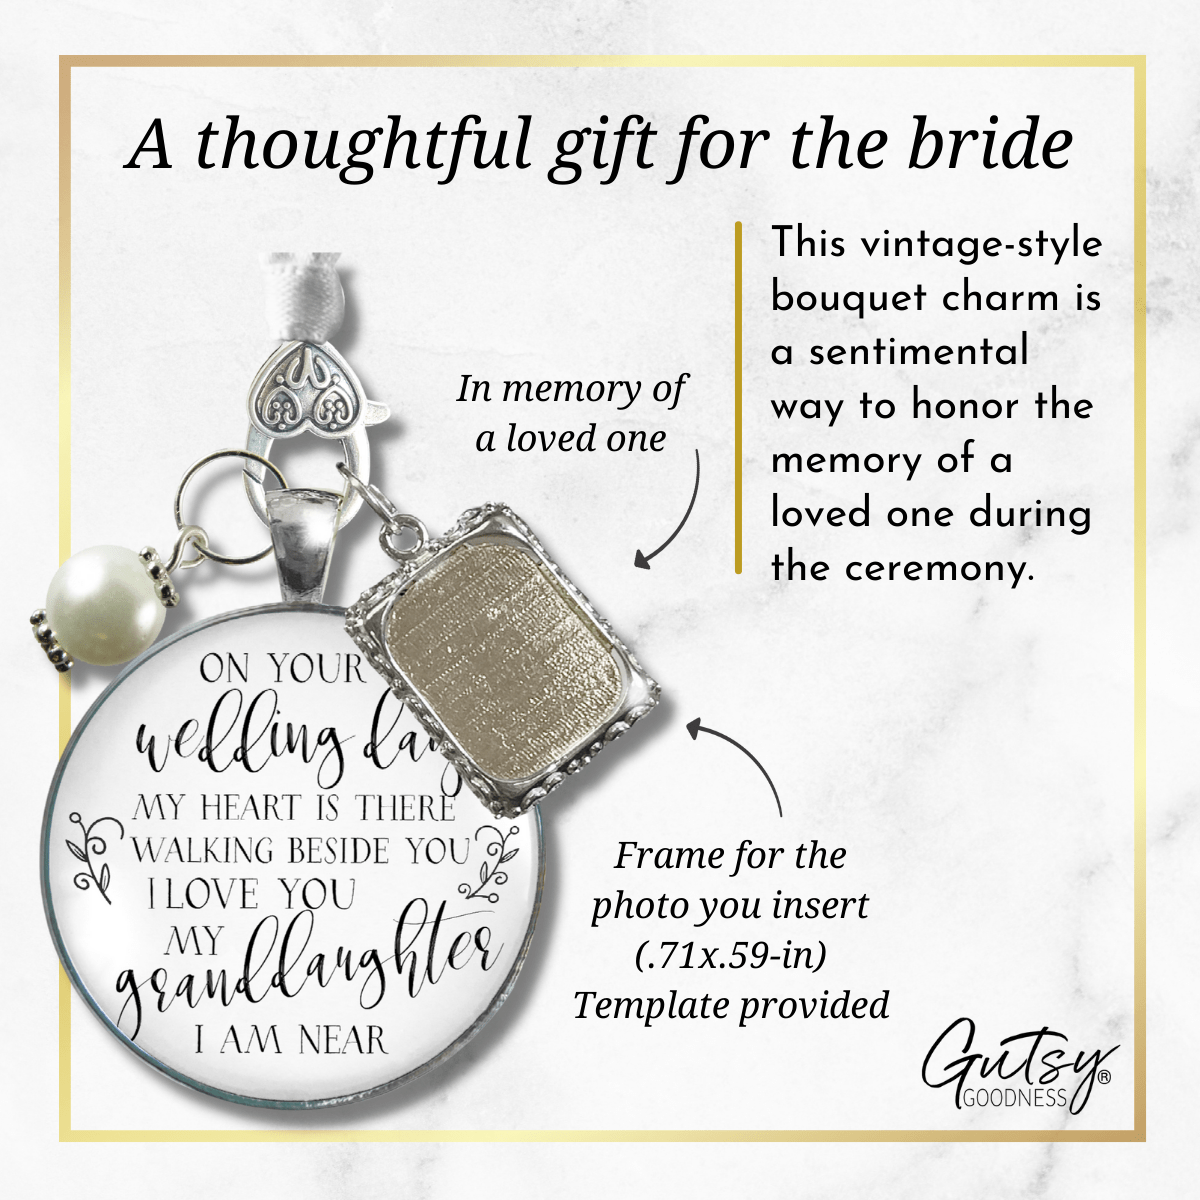 On Your Wedding Day MY Heart Is There Walking Beside You Granddaughter - Memorial Bouquet Charm, Silver, White Glass, White Pearl  Bouquet Charm - Gutsy Goodness Handmade Jewelry